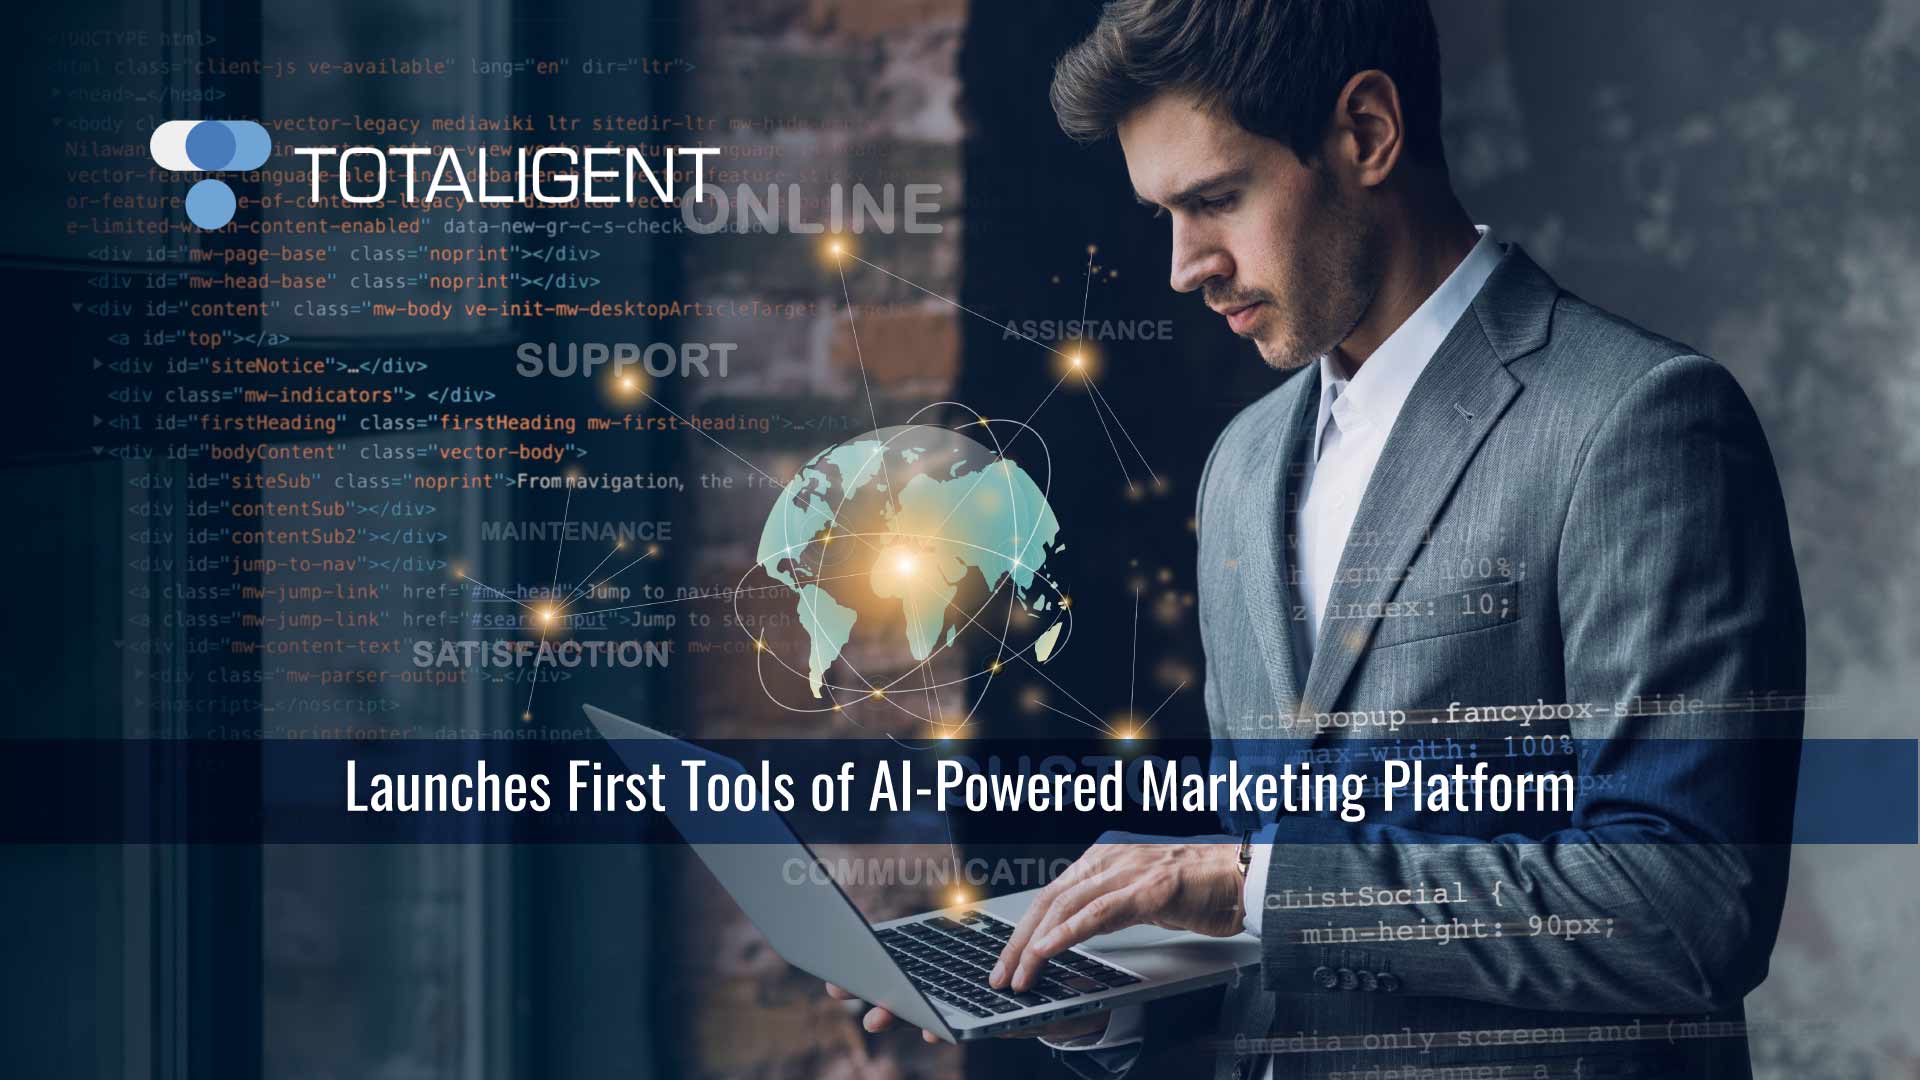 Totaligent Launches First Tools of Highly Anticipated AI-Powered Marketing Platform